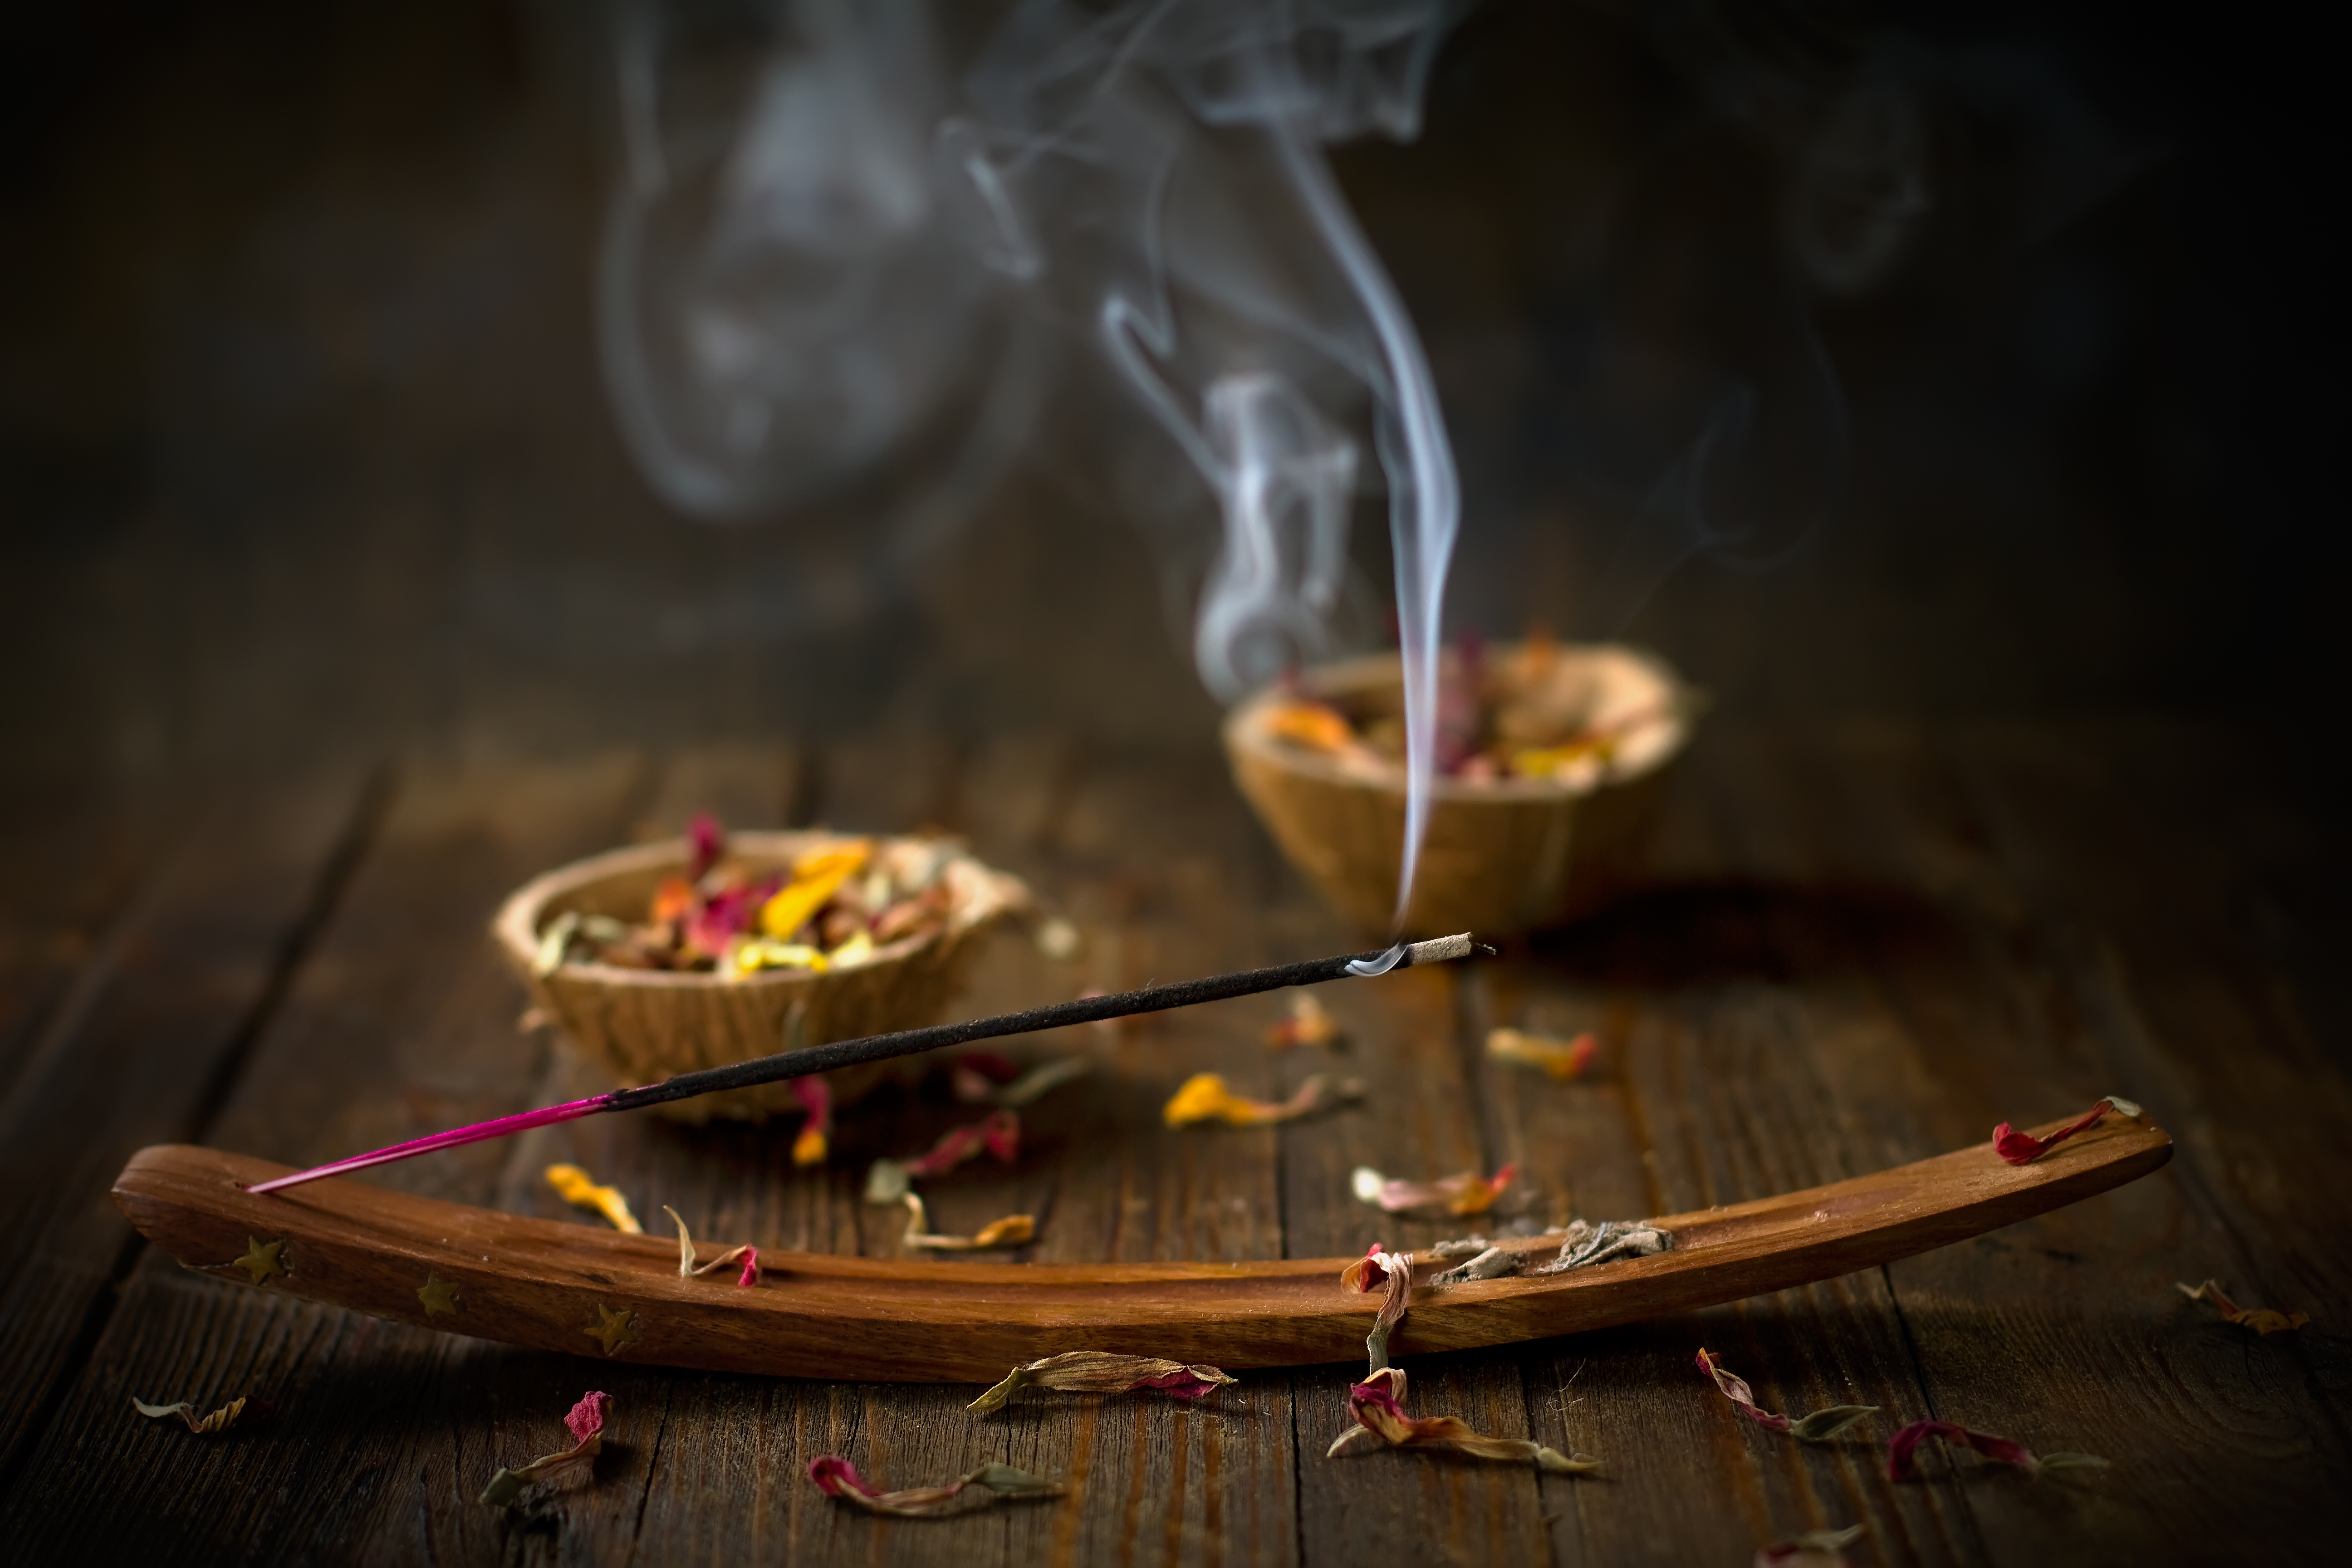 Relaxing Meditation Calm Natural Light Incense Still Life Chill Out Smoke Petals Brown Wood 5184x3456